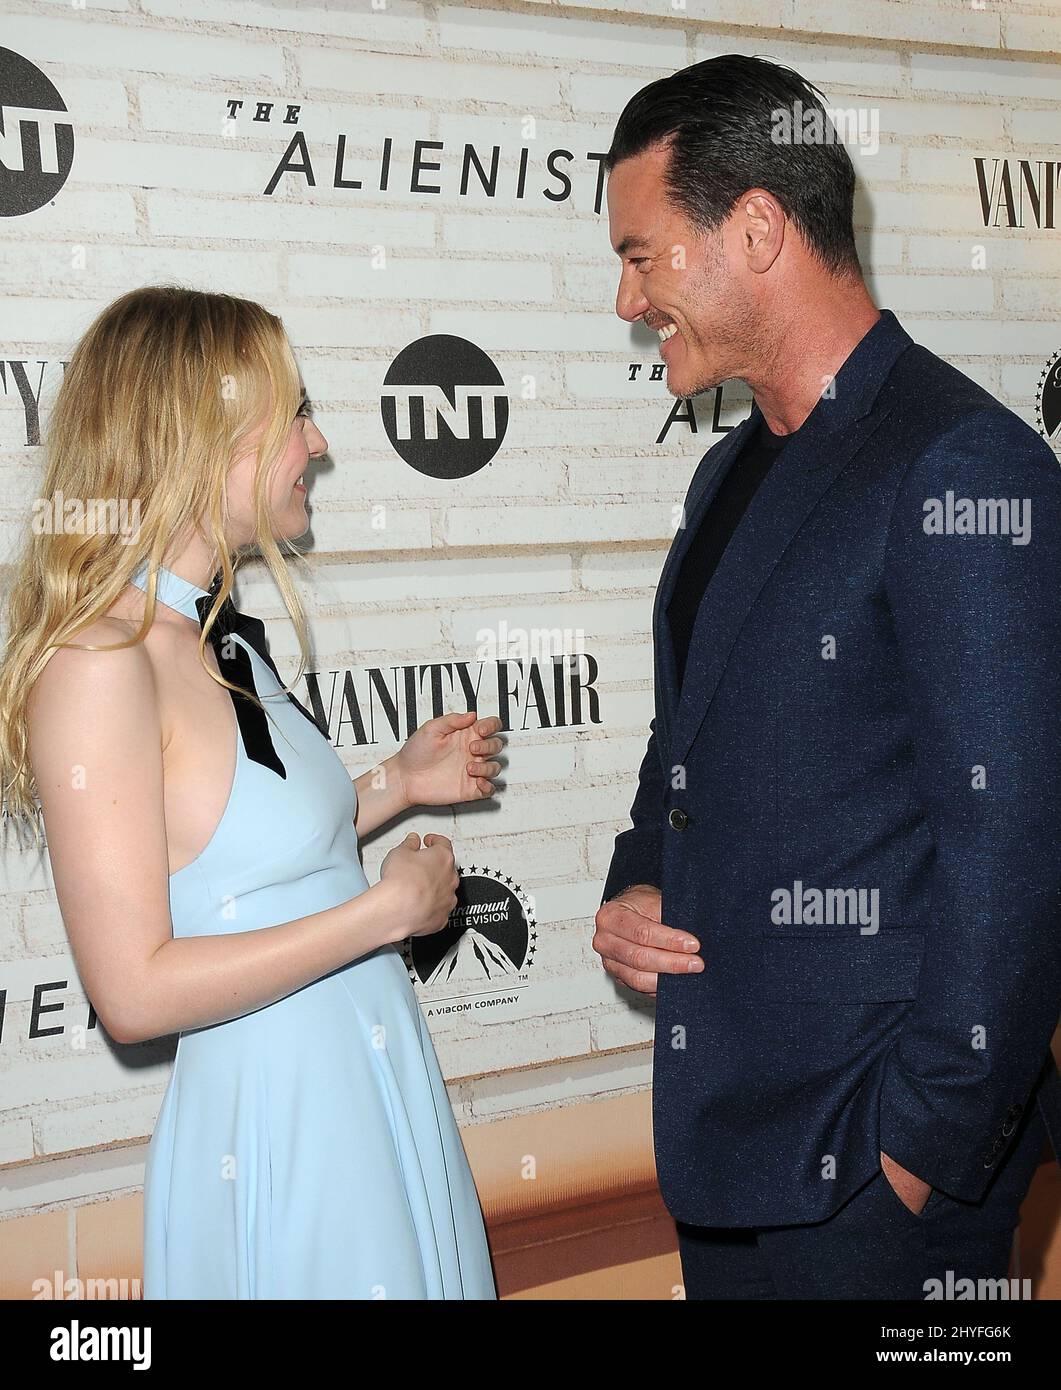 Dakota Fanning and Luke Evans attending the NT's 'The Alienist' FYC event held at the Wallis Annenberg Center, CA on May 23, 2018. Stock Photo